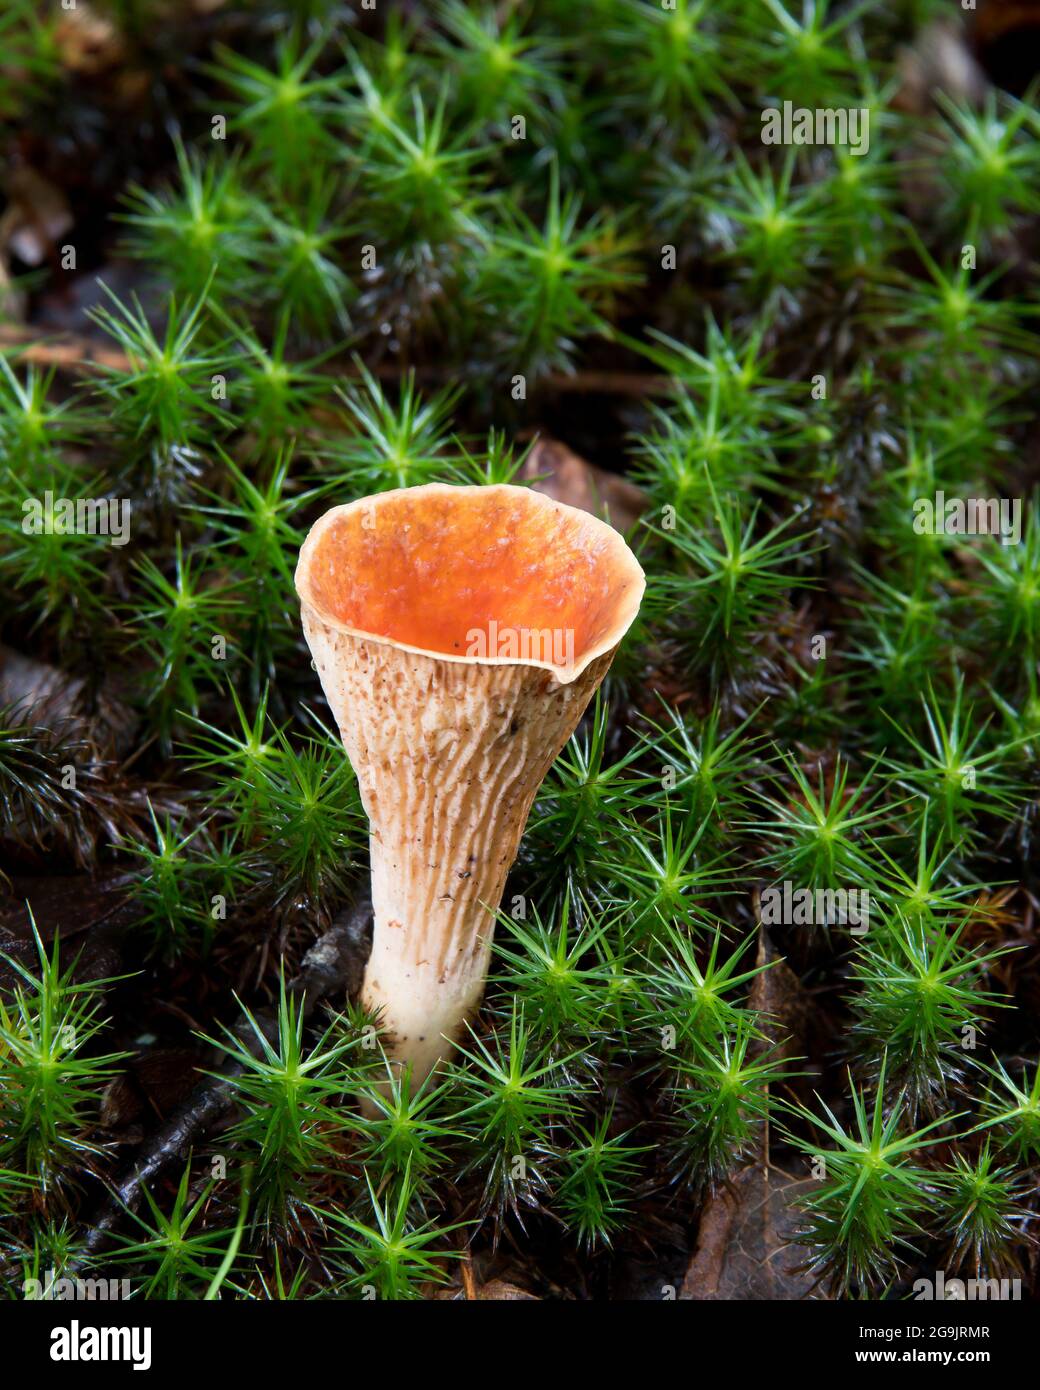 Turbinellus floccosus, commonly known as scaly vase mushrooms growing on the forest floor in the Adirondack Mountains, NY wilderness. Stock Photo